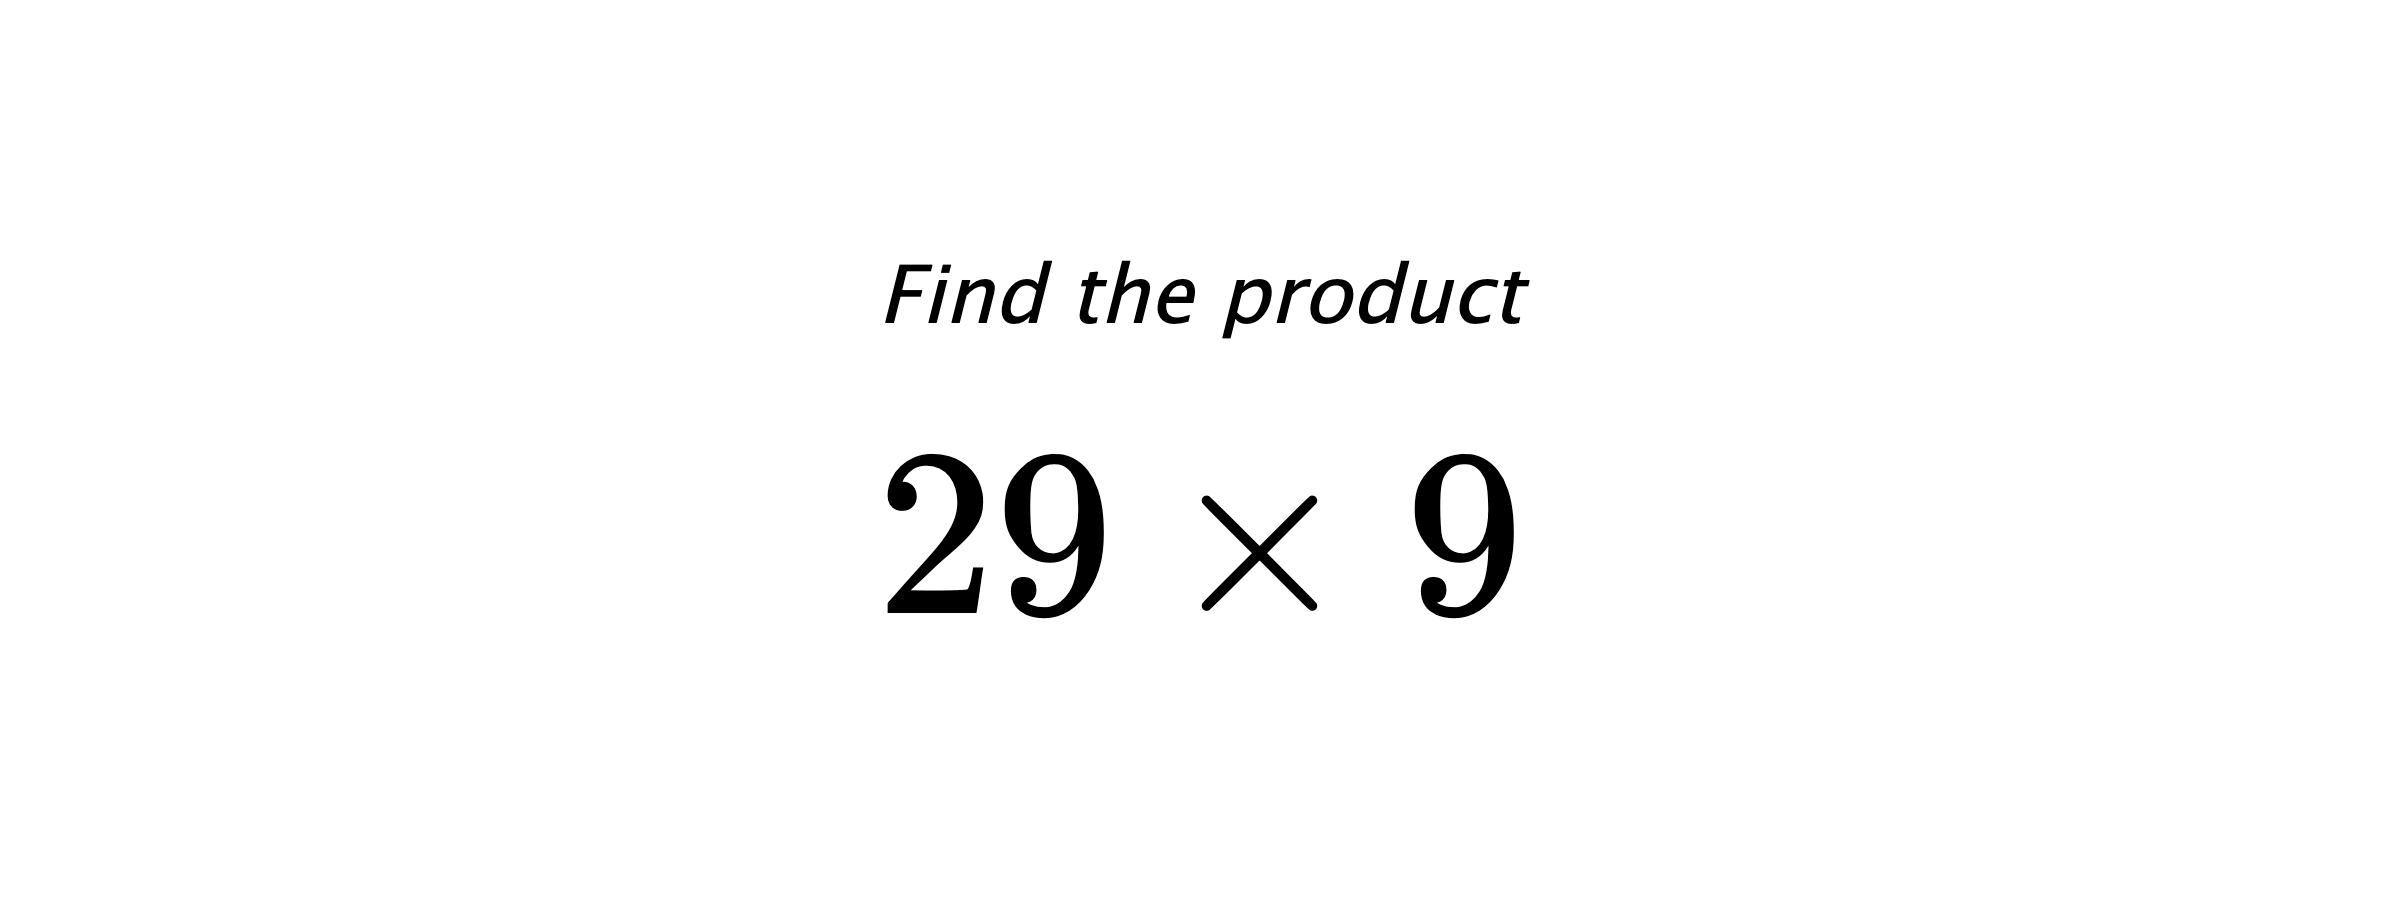 Find the product $ 29 \times 9 $